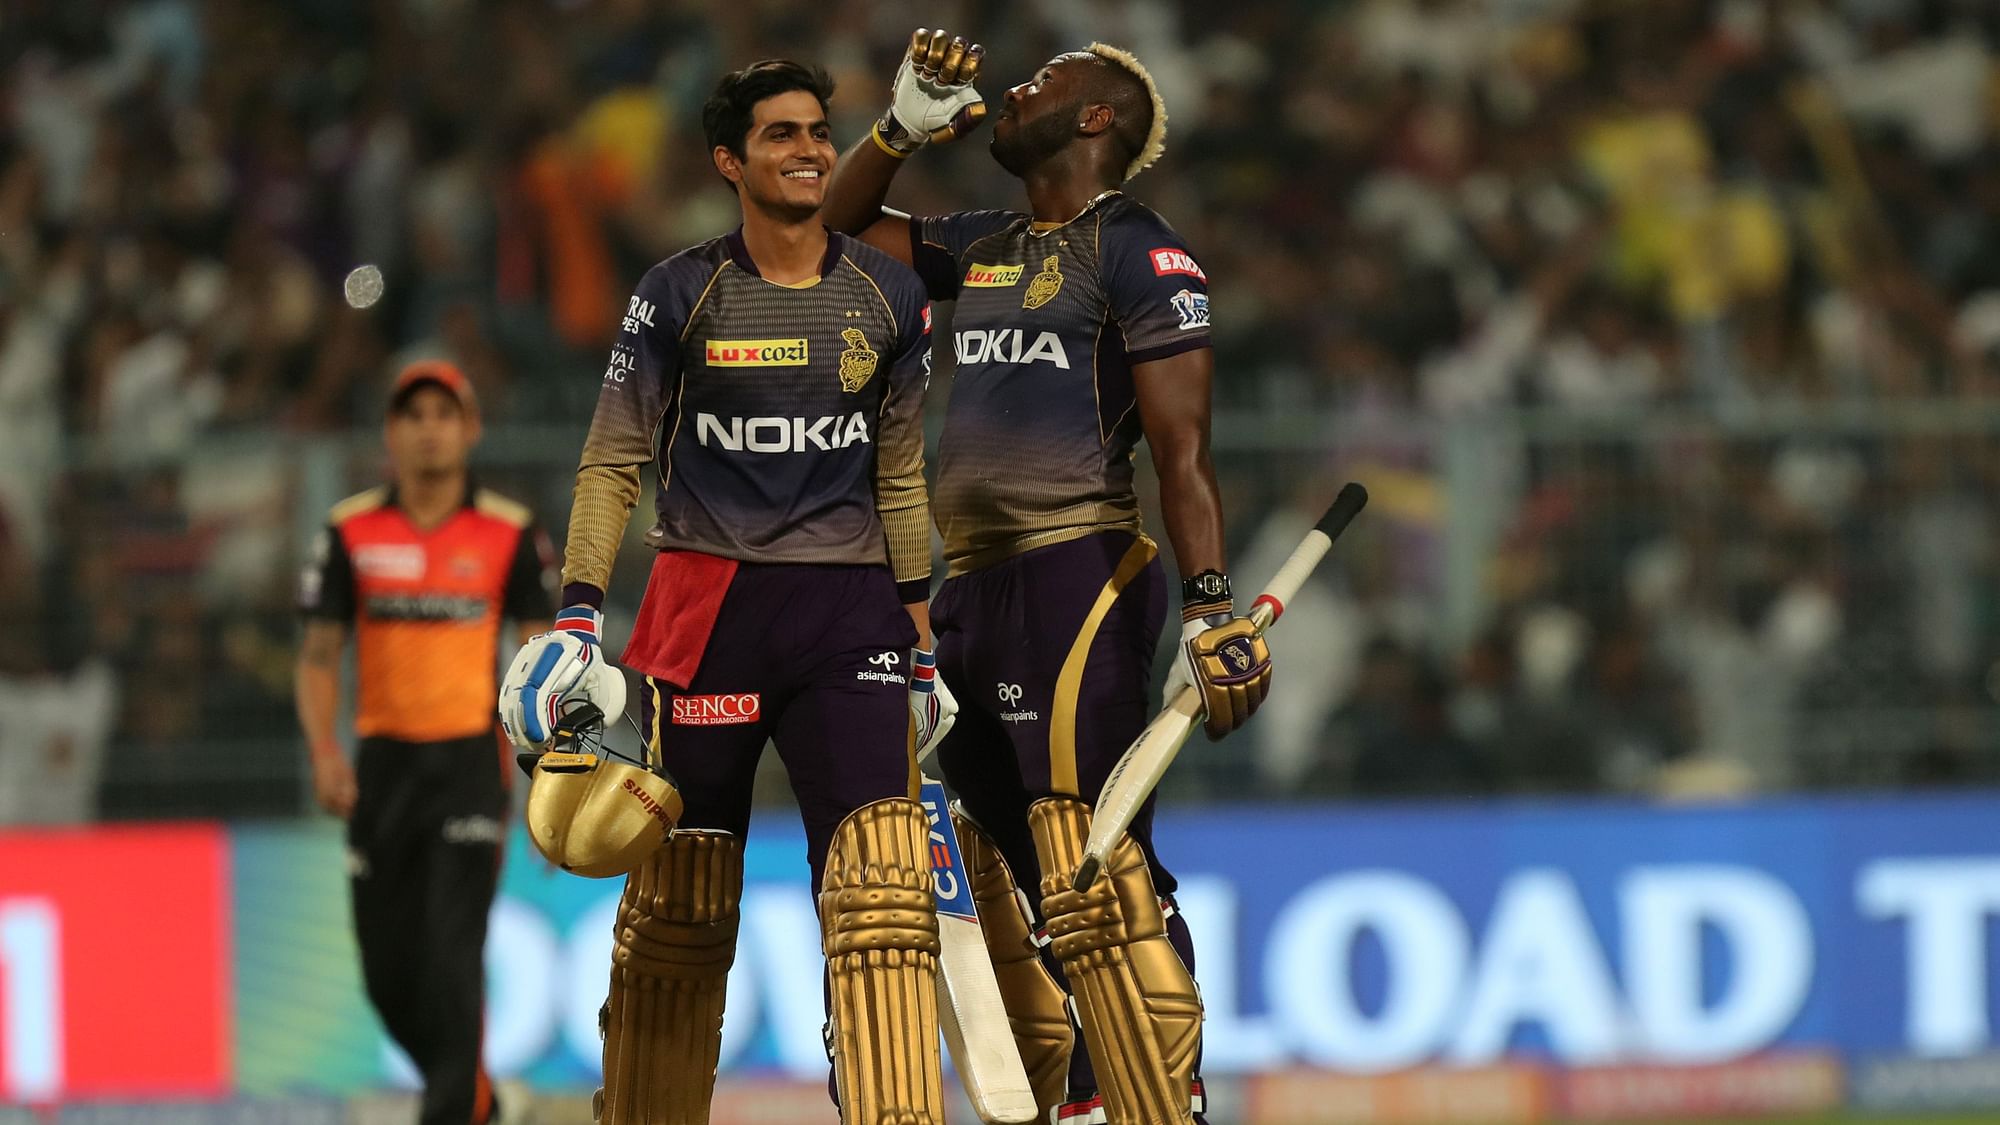 Andre Russell shone with ball also as he was the best KKR bowler taking two wickets, including David Warner.